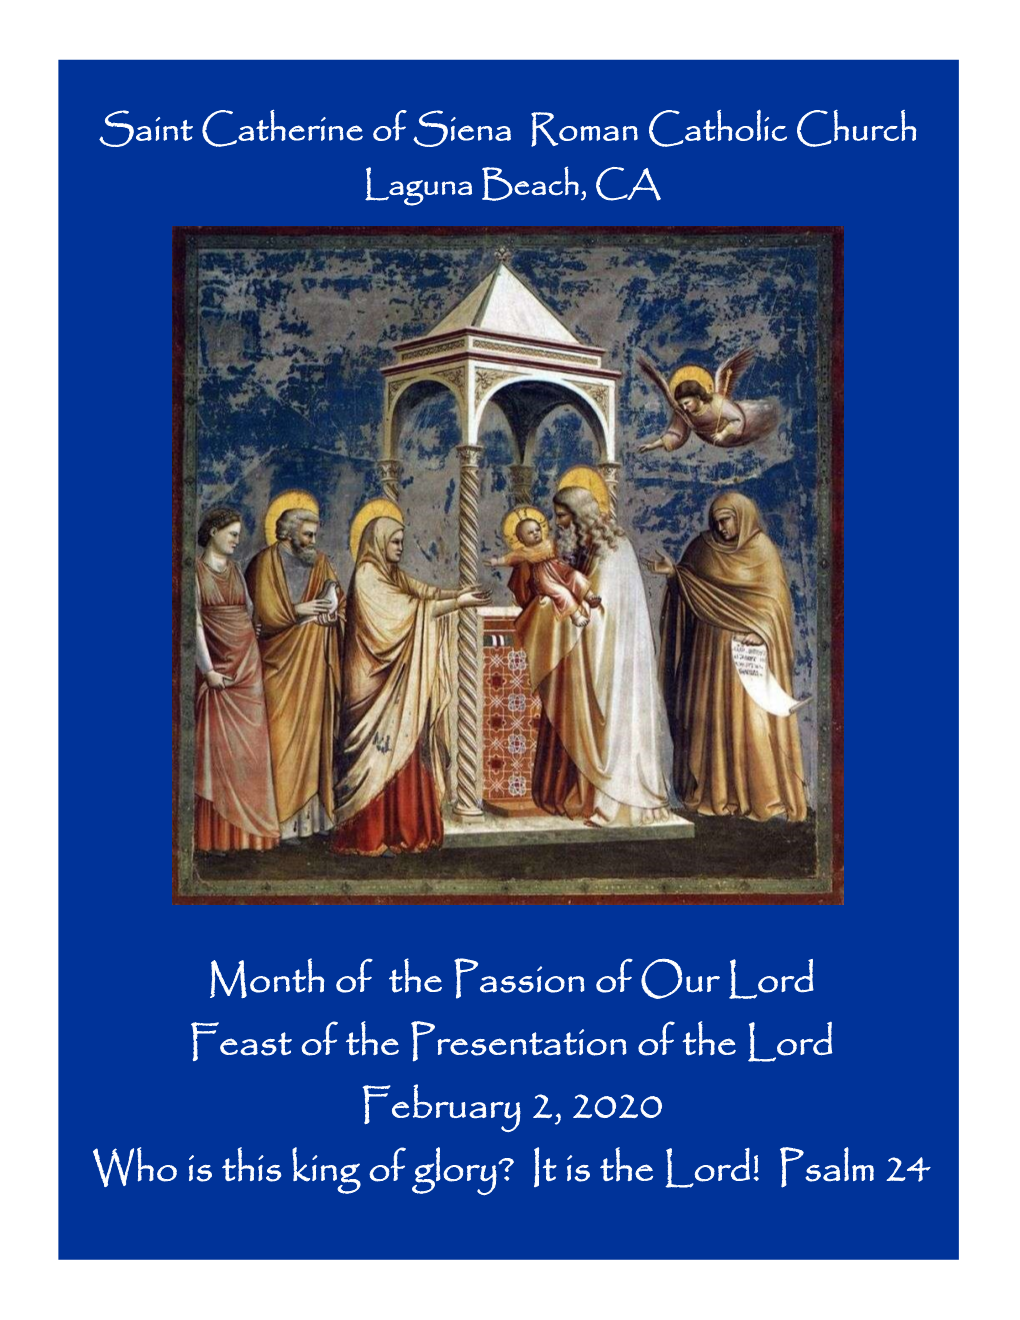 Month of the Passion of Our Lord Feast of the Presentation of the Lord February 2, 2020 Who Is This King of Glory? It Is the Lord! Psalm 24